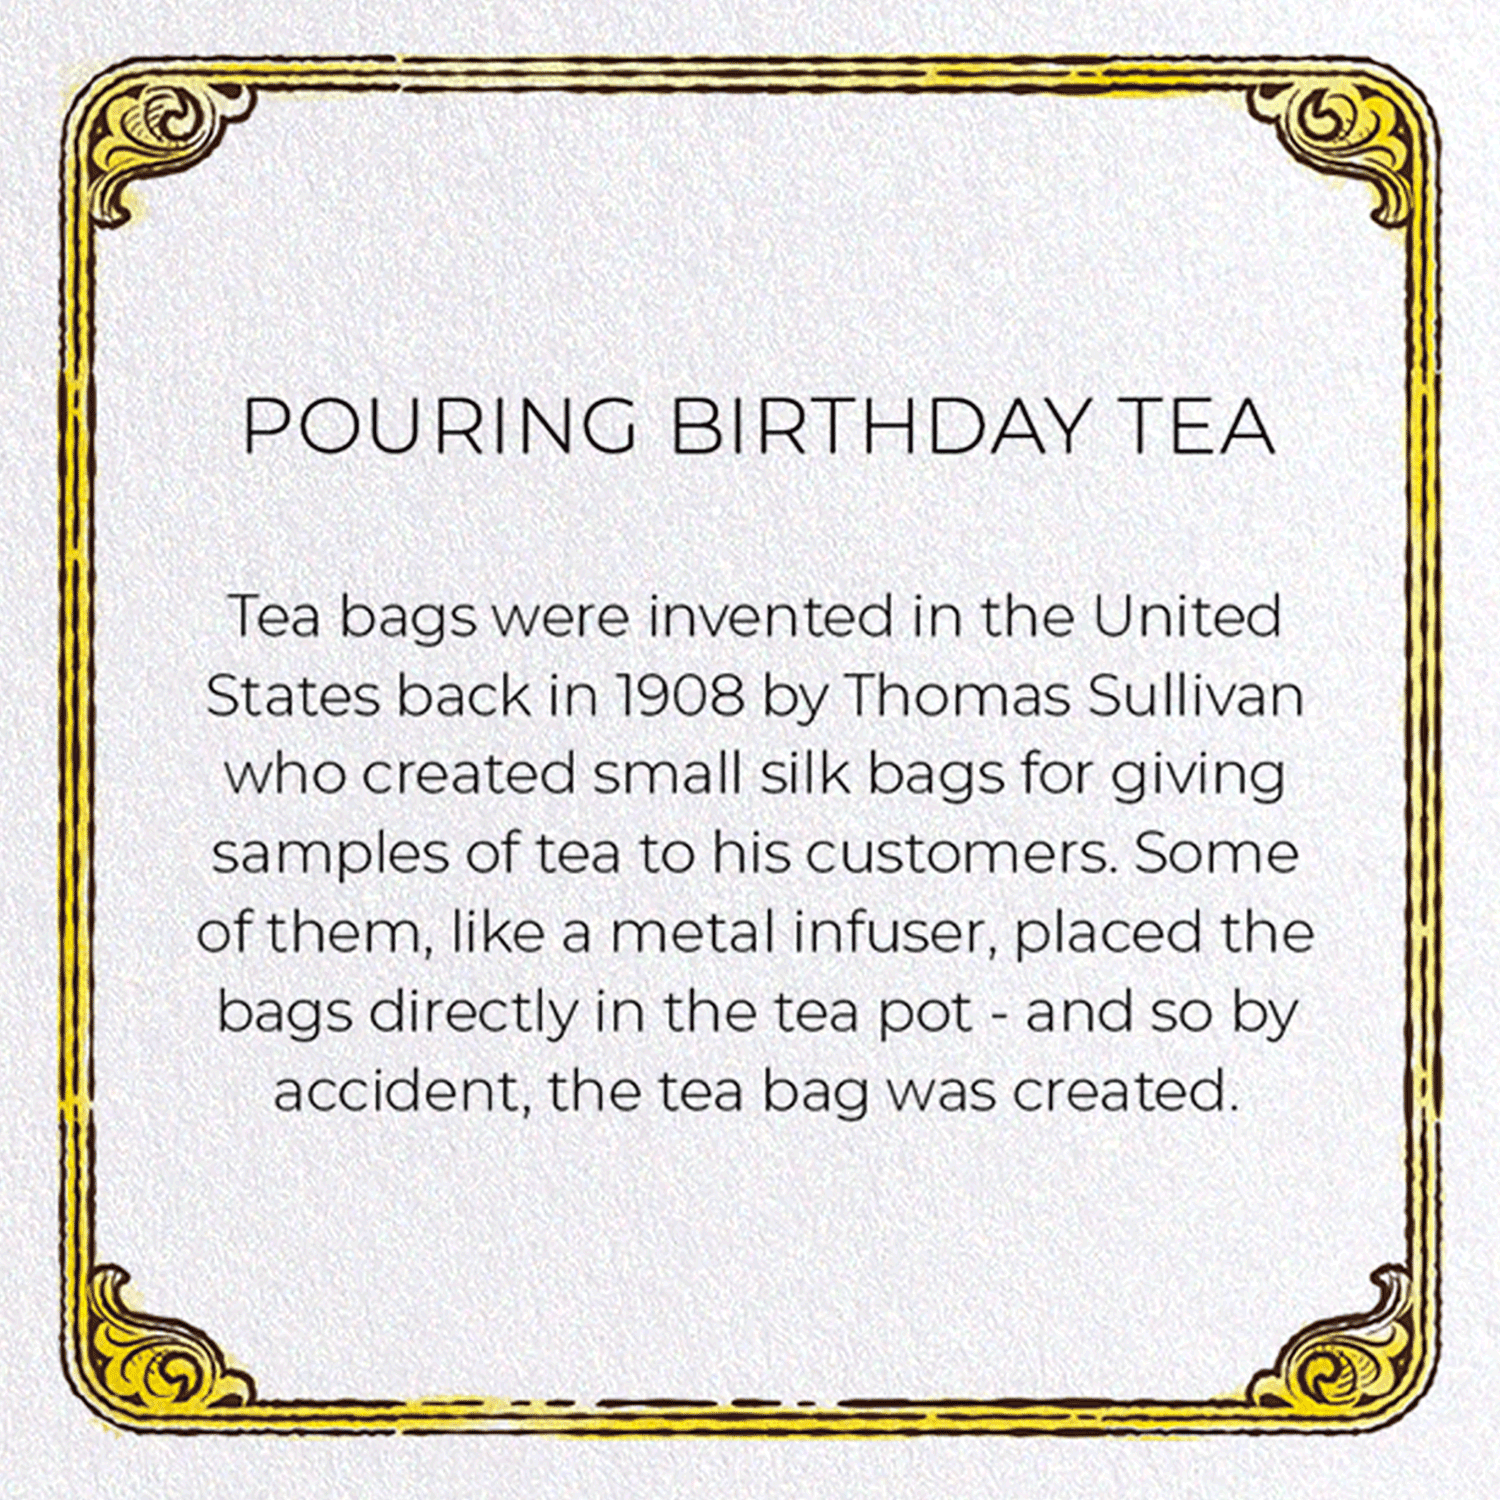 POURING BIRTHDAY TEA: Victorian Greeting Card